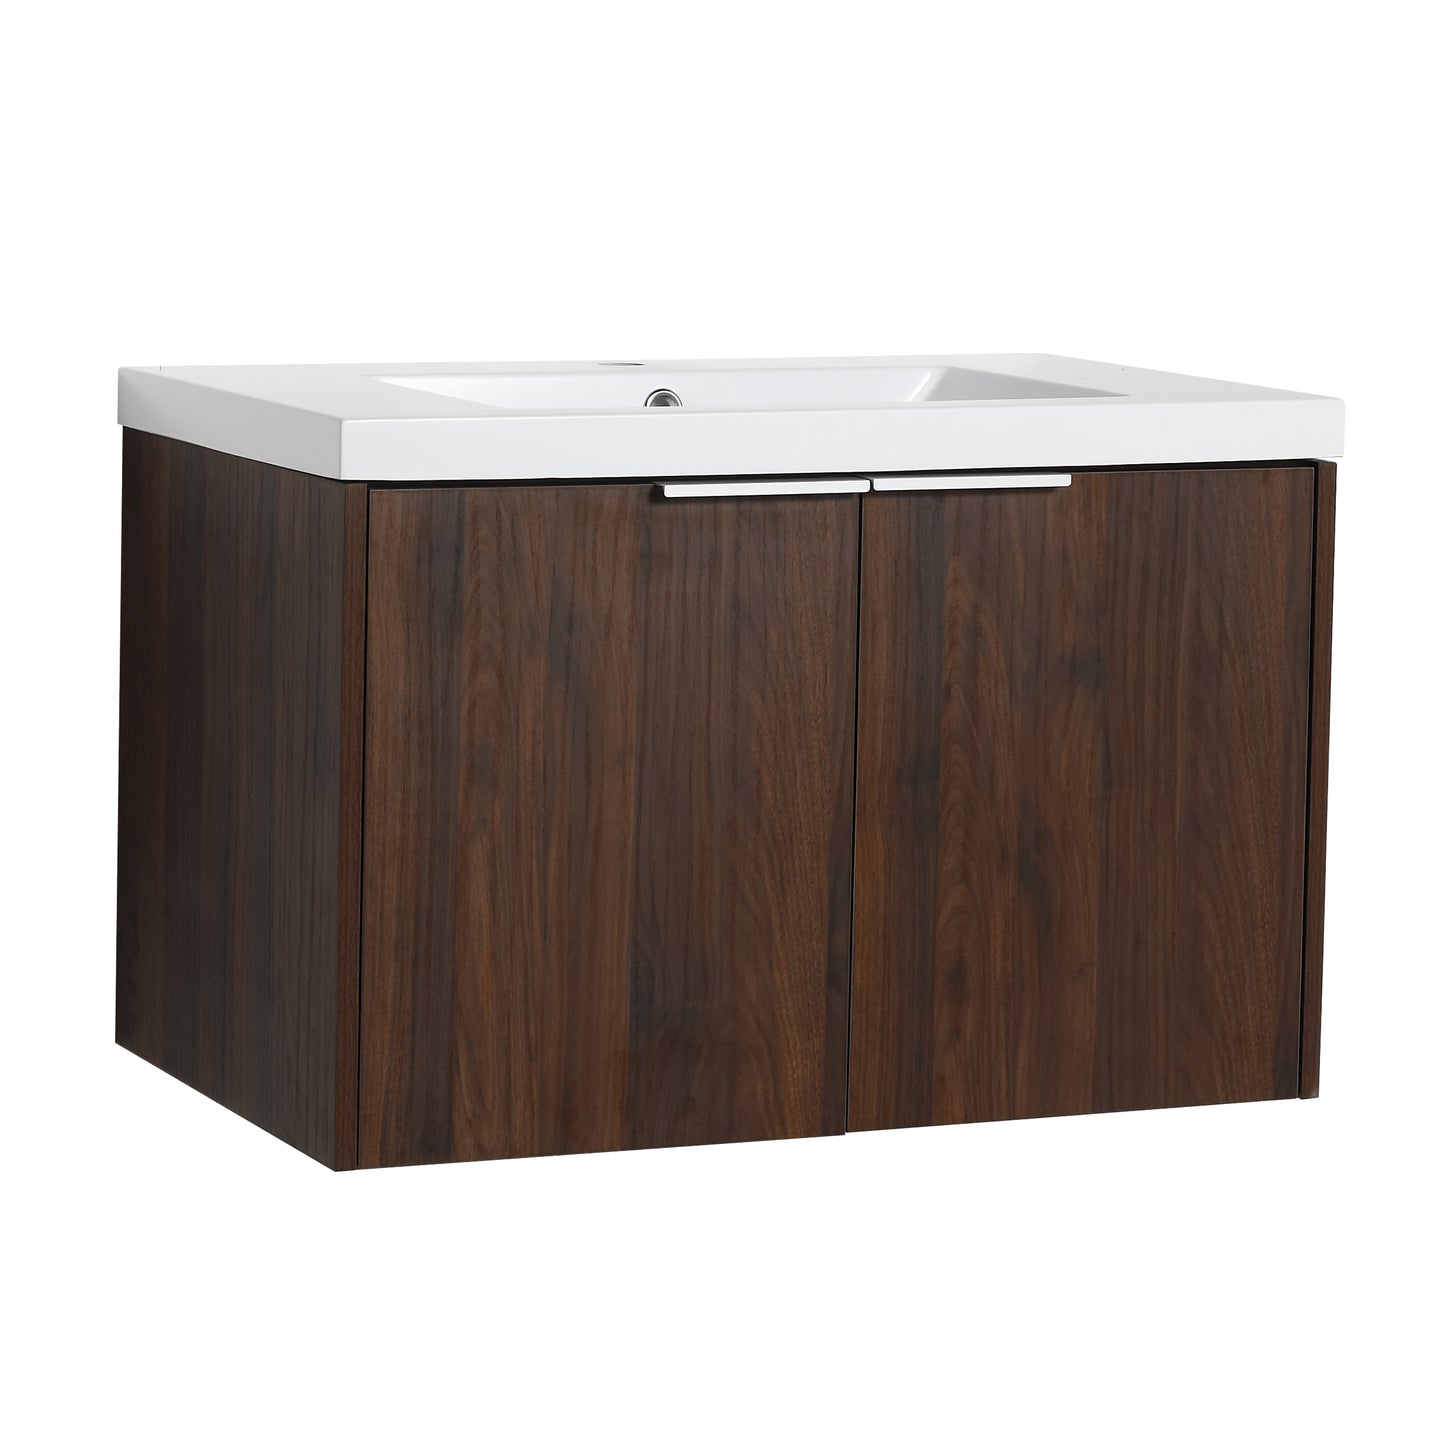 Soft Close Doors Bathroom Vanity With Sink,30 Inch For Small Bathroom,30x18-00630CAW（KD-Packing）